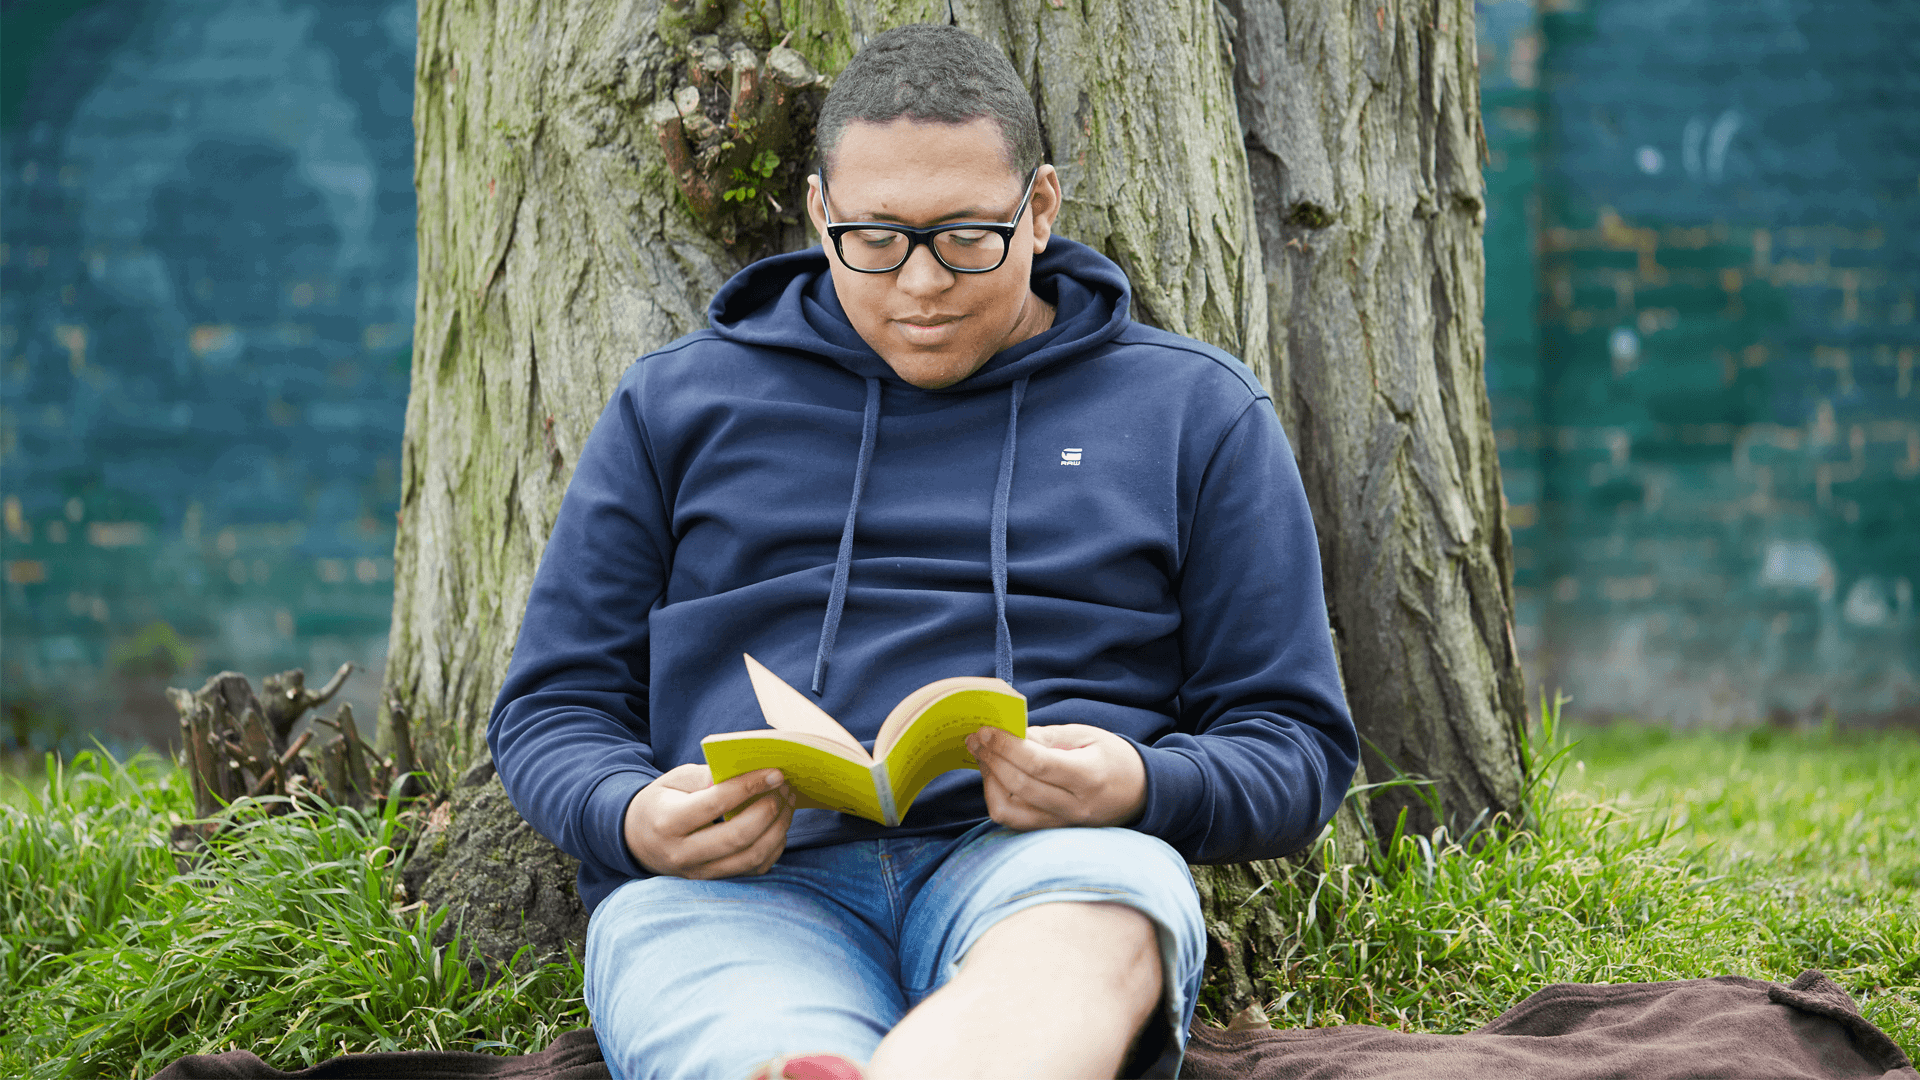 medium-shot-of-young-man-with-glasses-and-black-hoodie-reading-a-book-while-sitting-on-the-grass-leaning-on-a-tree